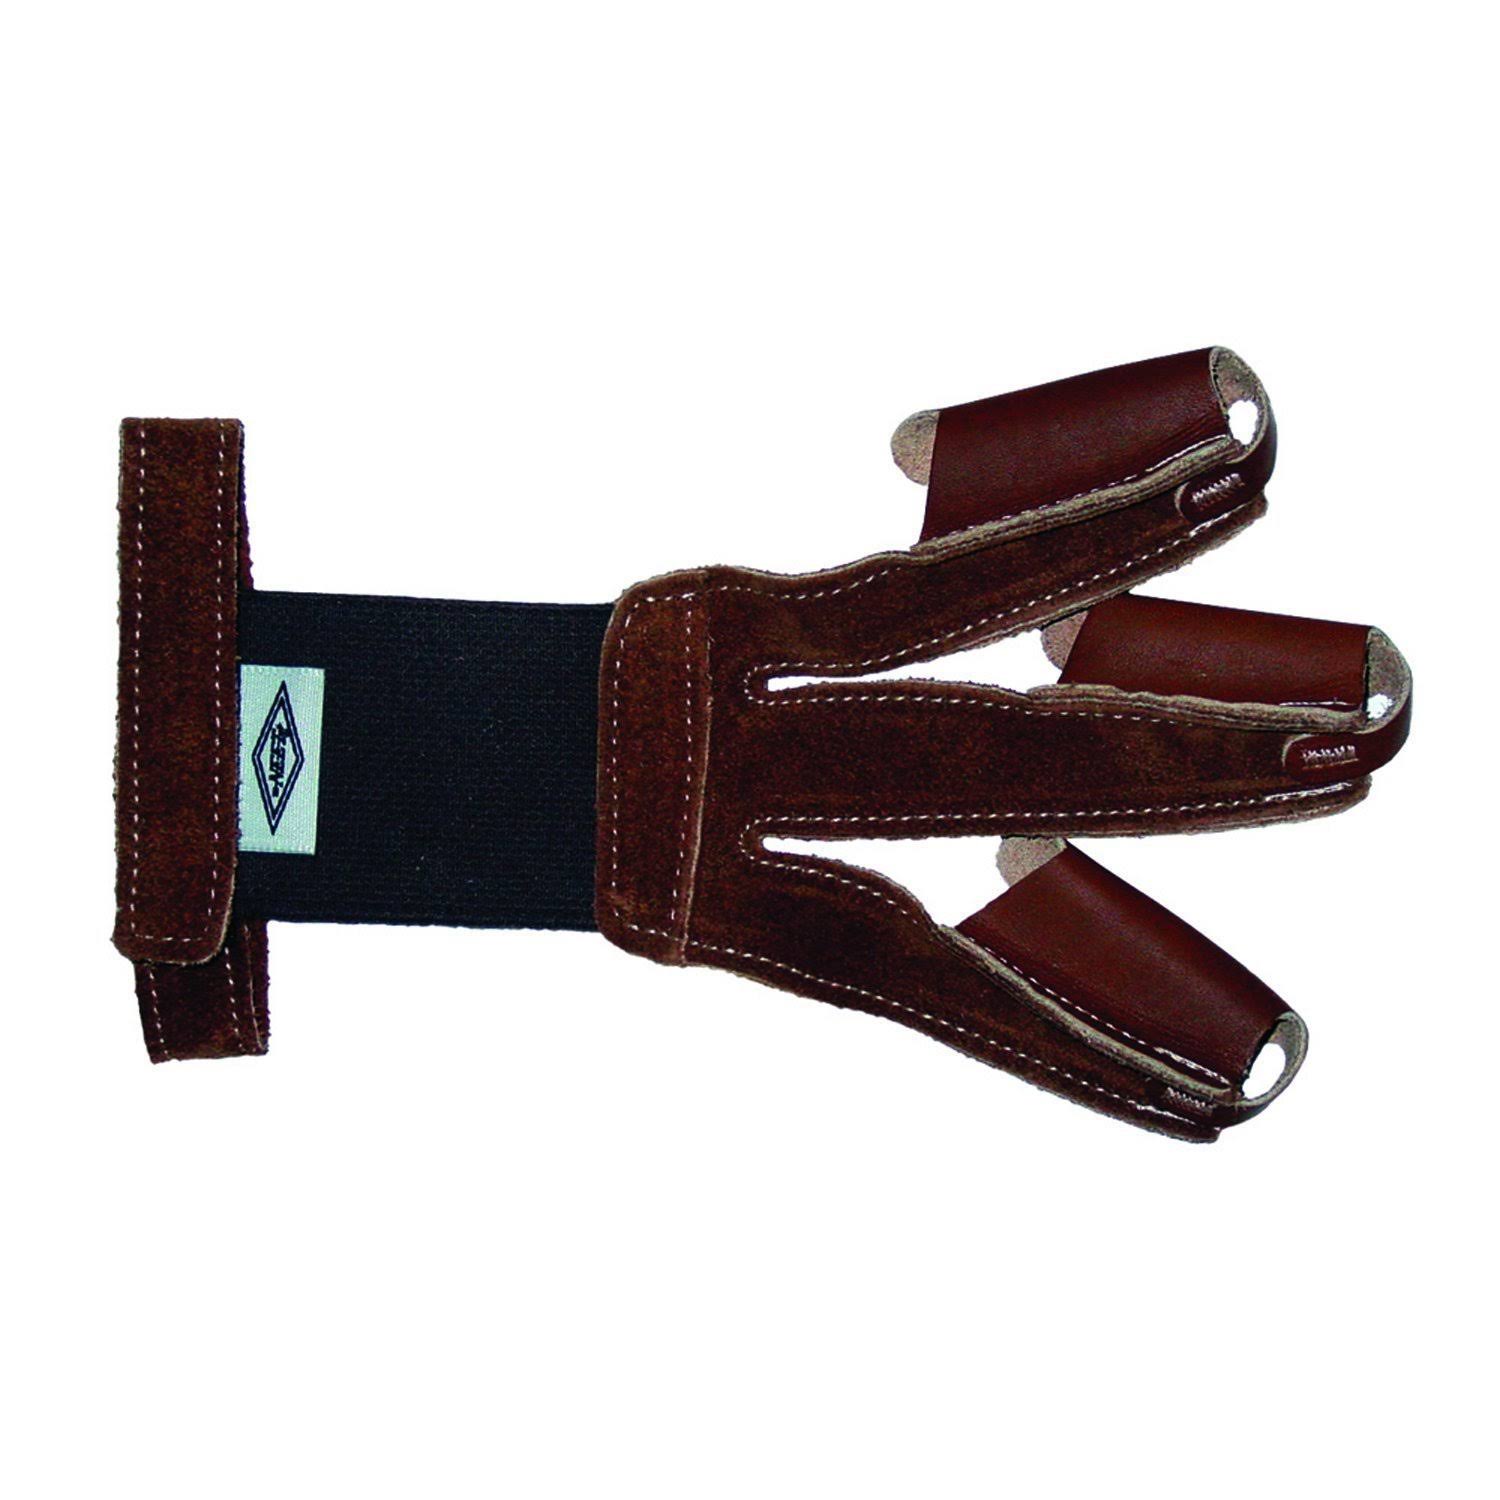 Neet Suede Shooting Gloves - Small, Brown